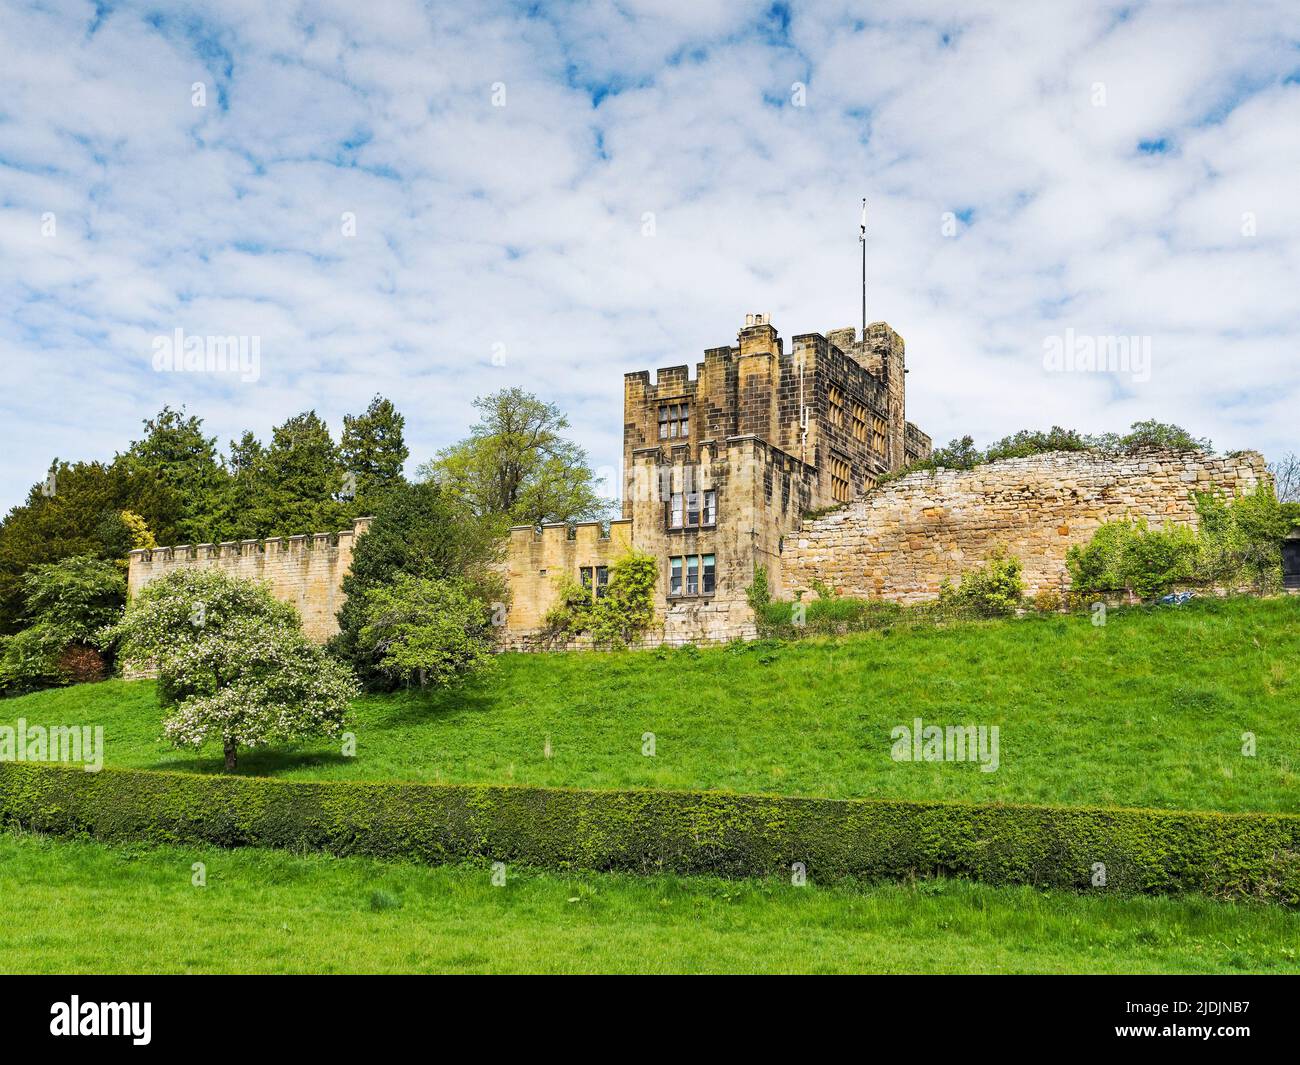 Bothal Castle in the Northumberland village of Bothal dates from the 12th century and is a scheduled ancient monument and stately home. Stock Photo